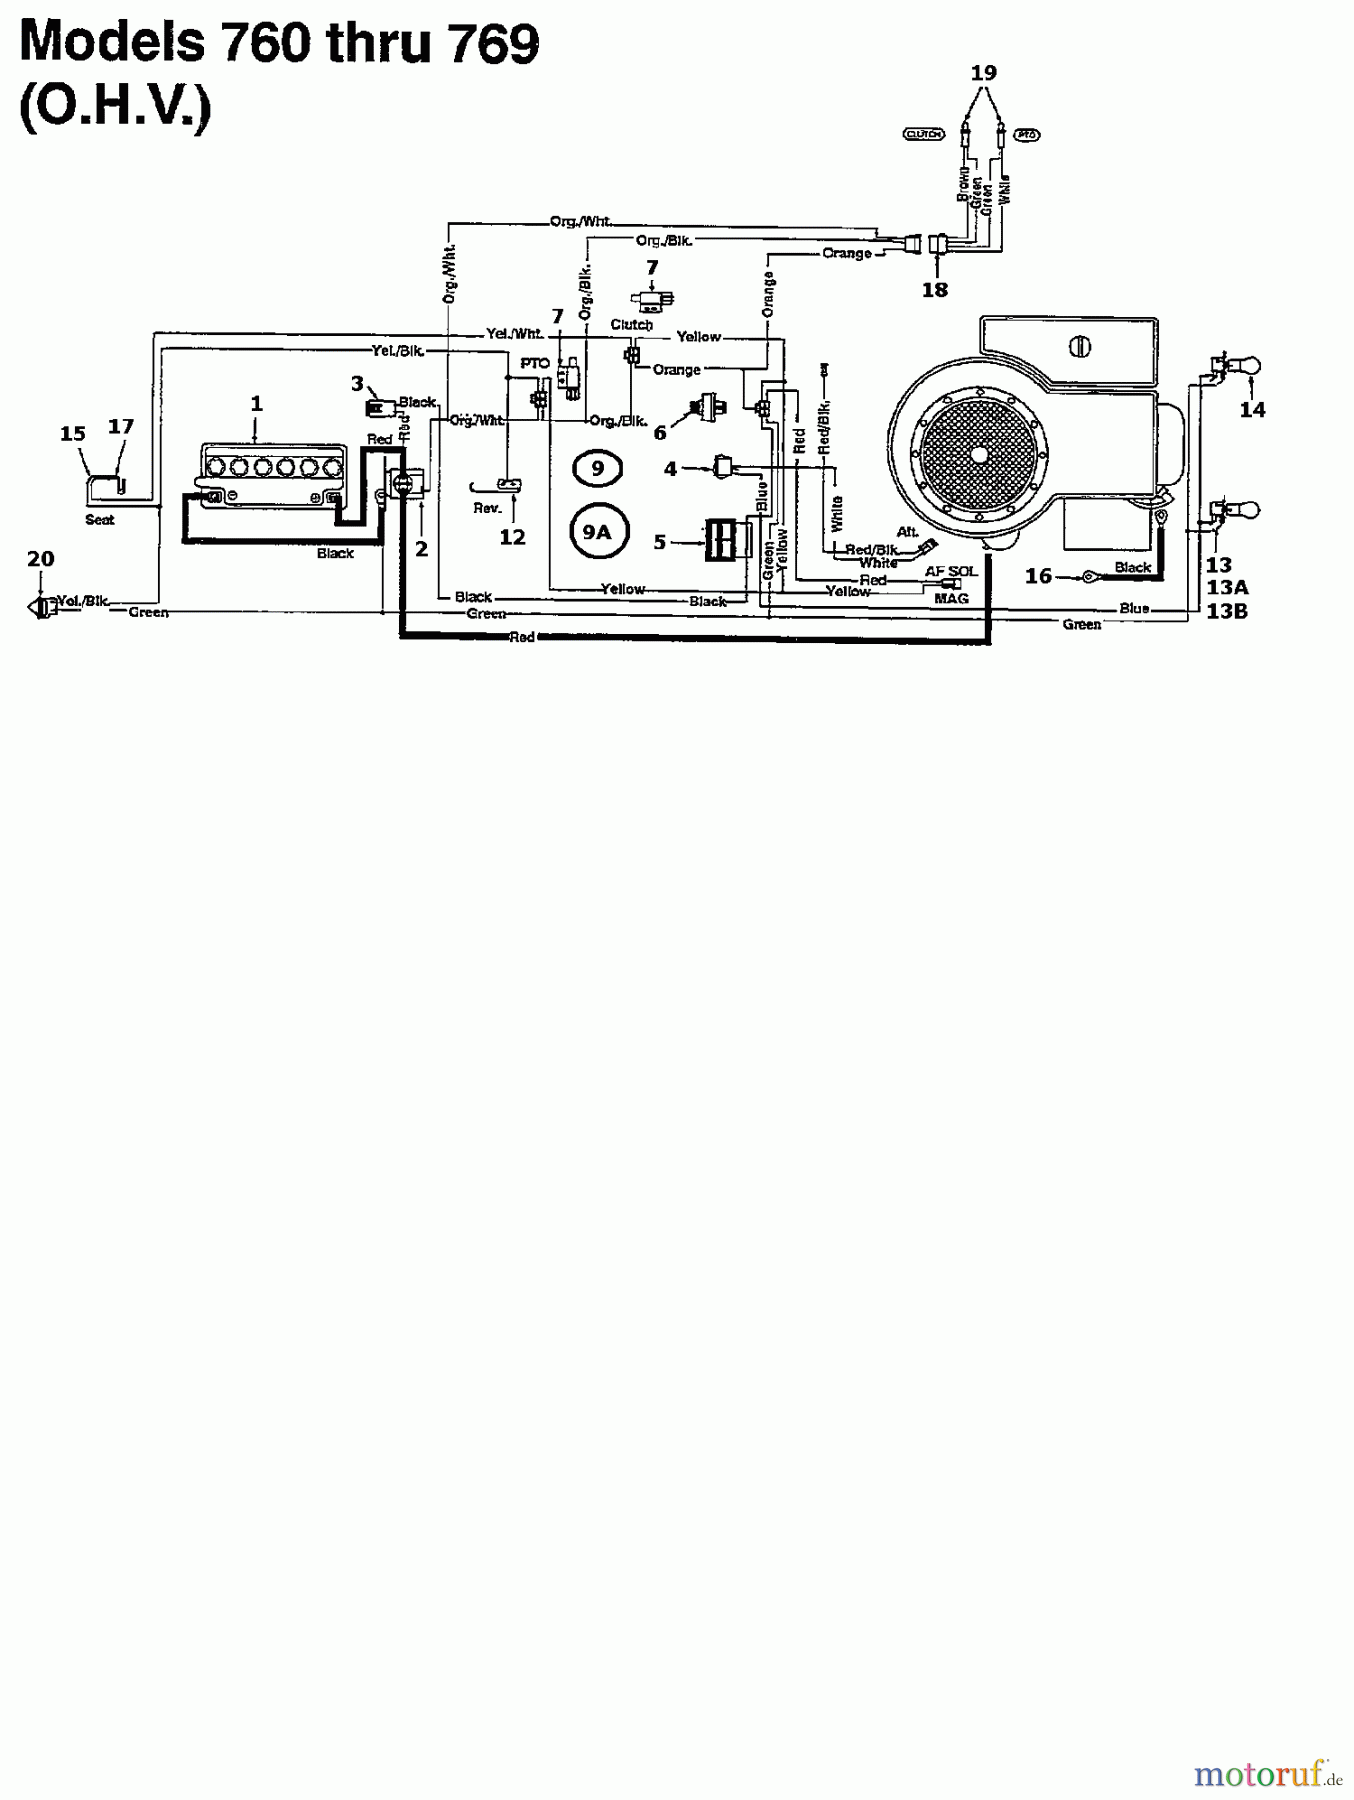  MTD Lawn tractors 125/40 134-765N678  (1994) Wiring diagram for O.H.V.